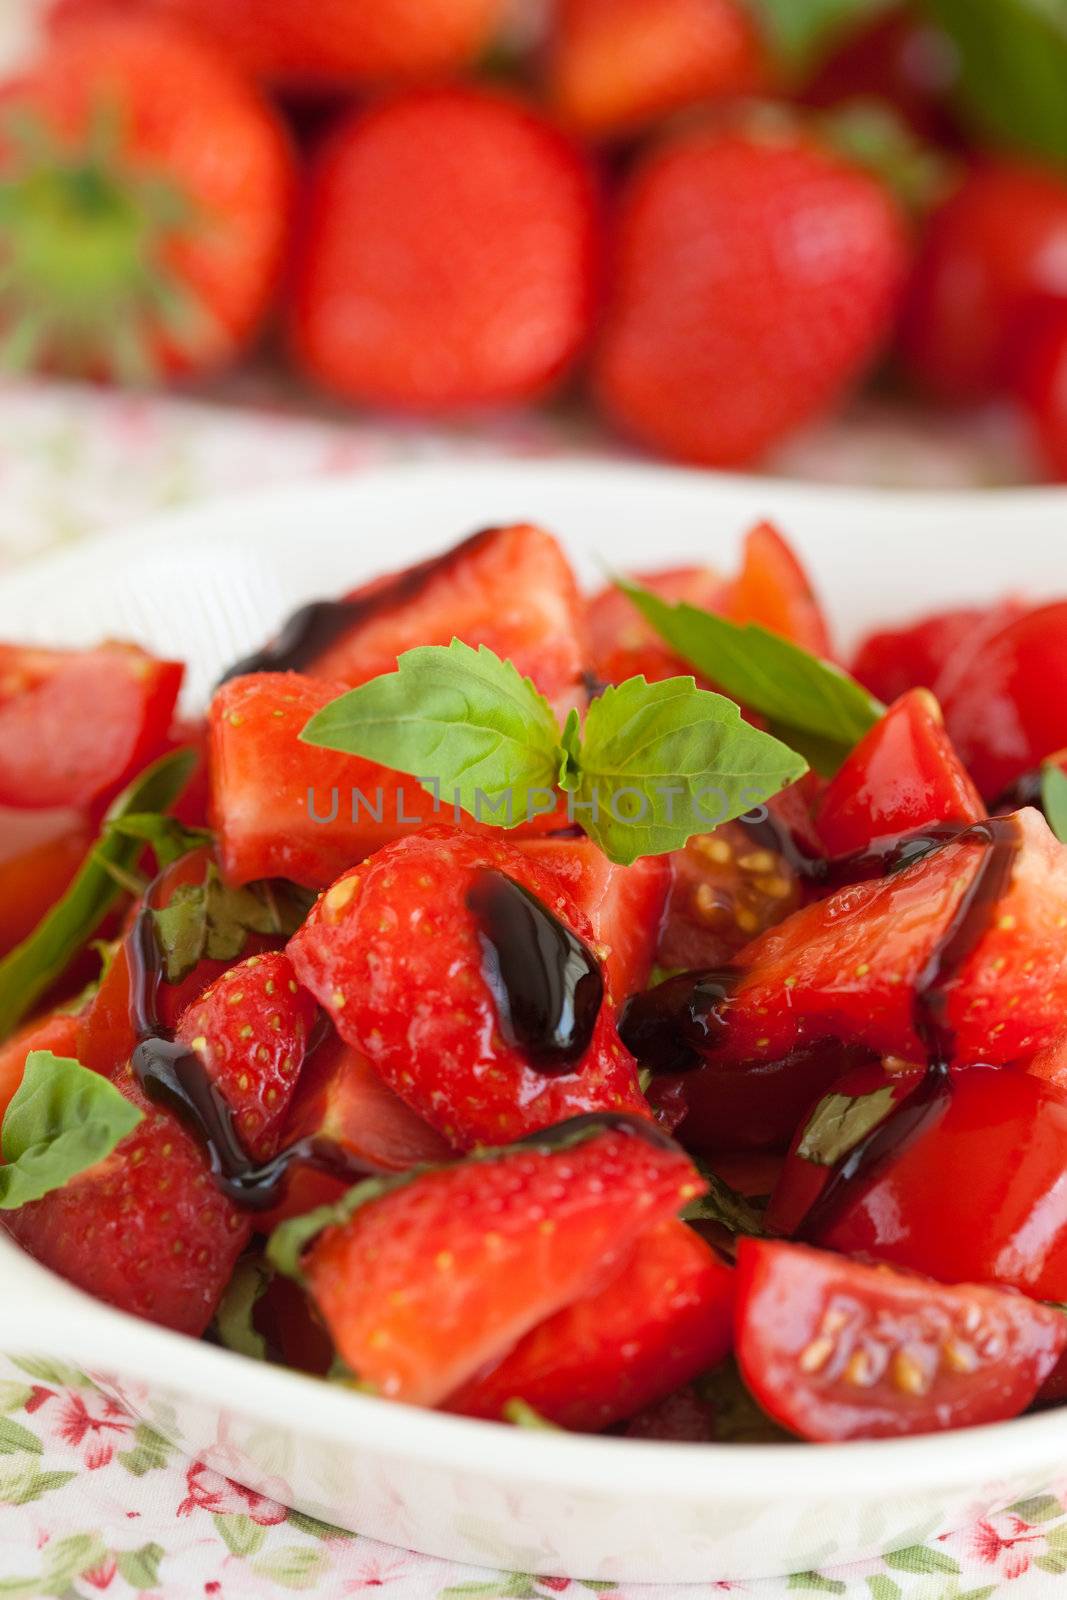 Delicious and healthy; strawberry tomato salad with balsamic glaze